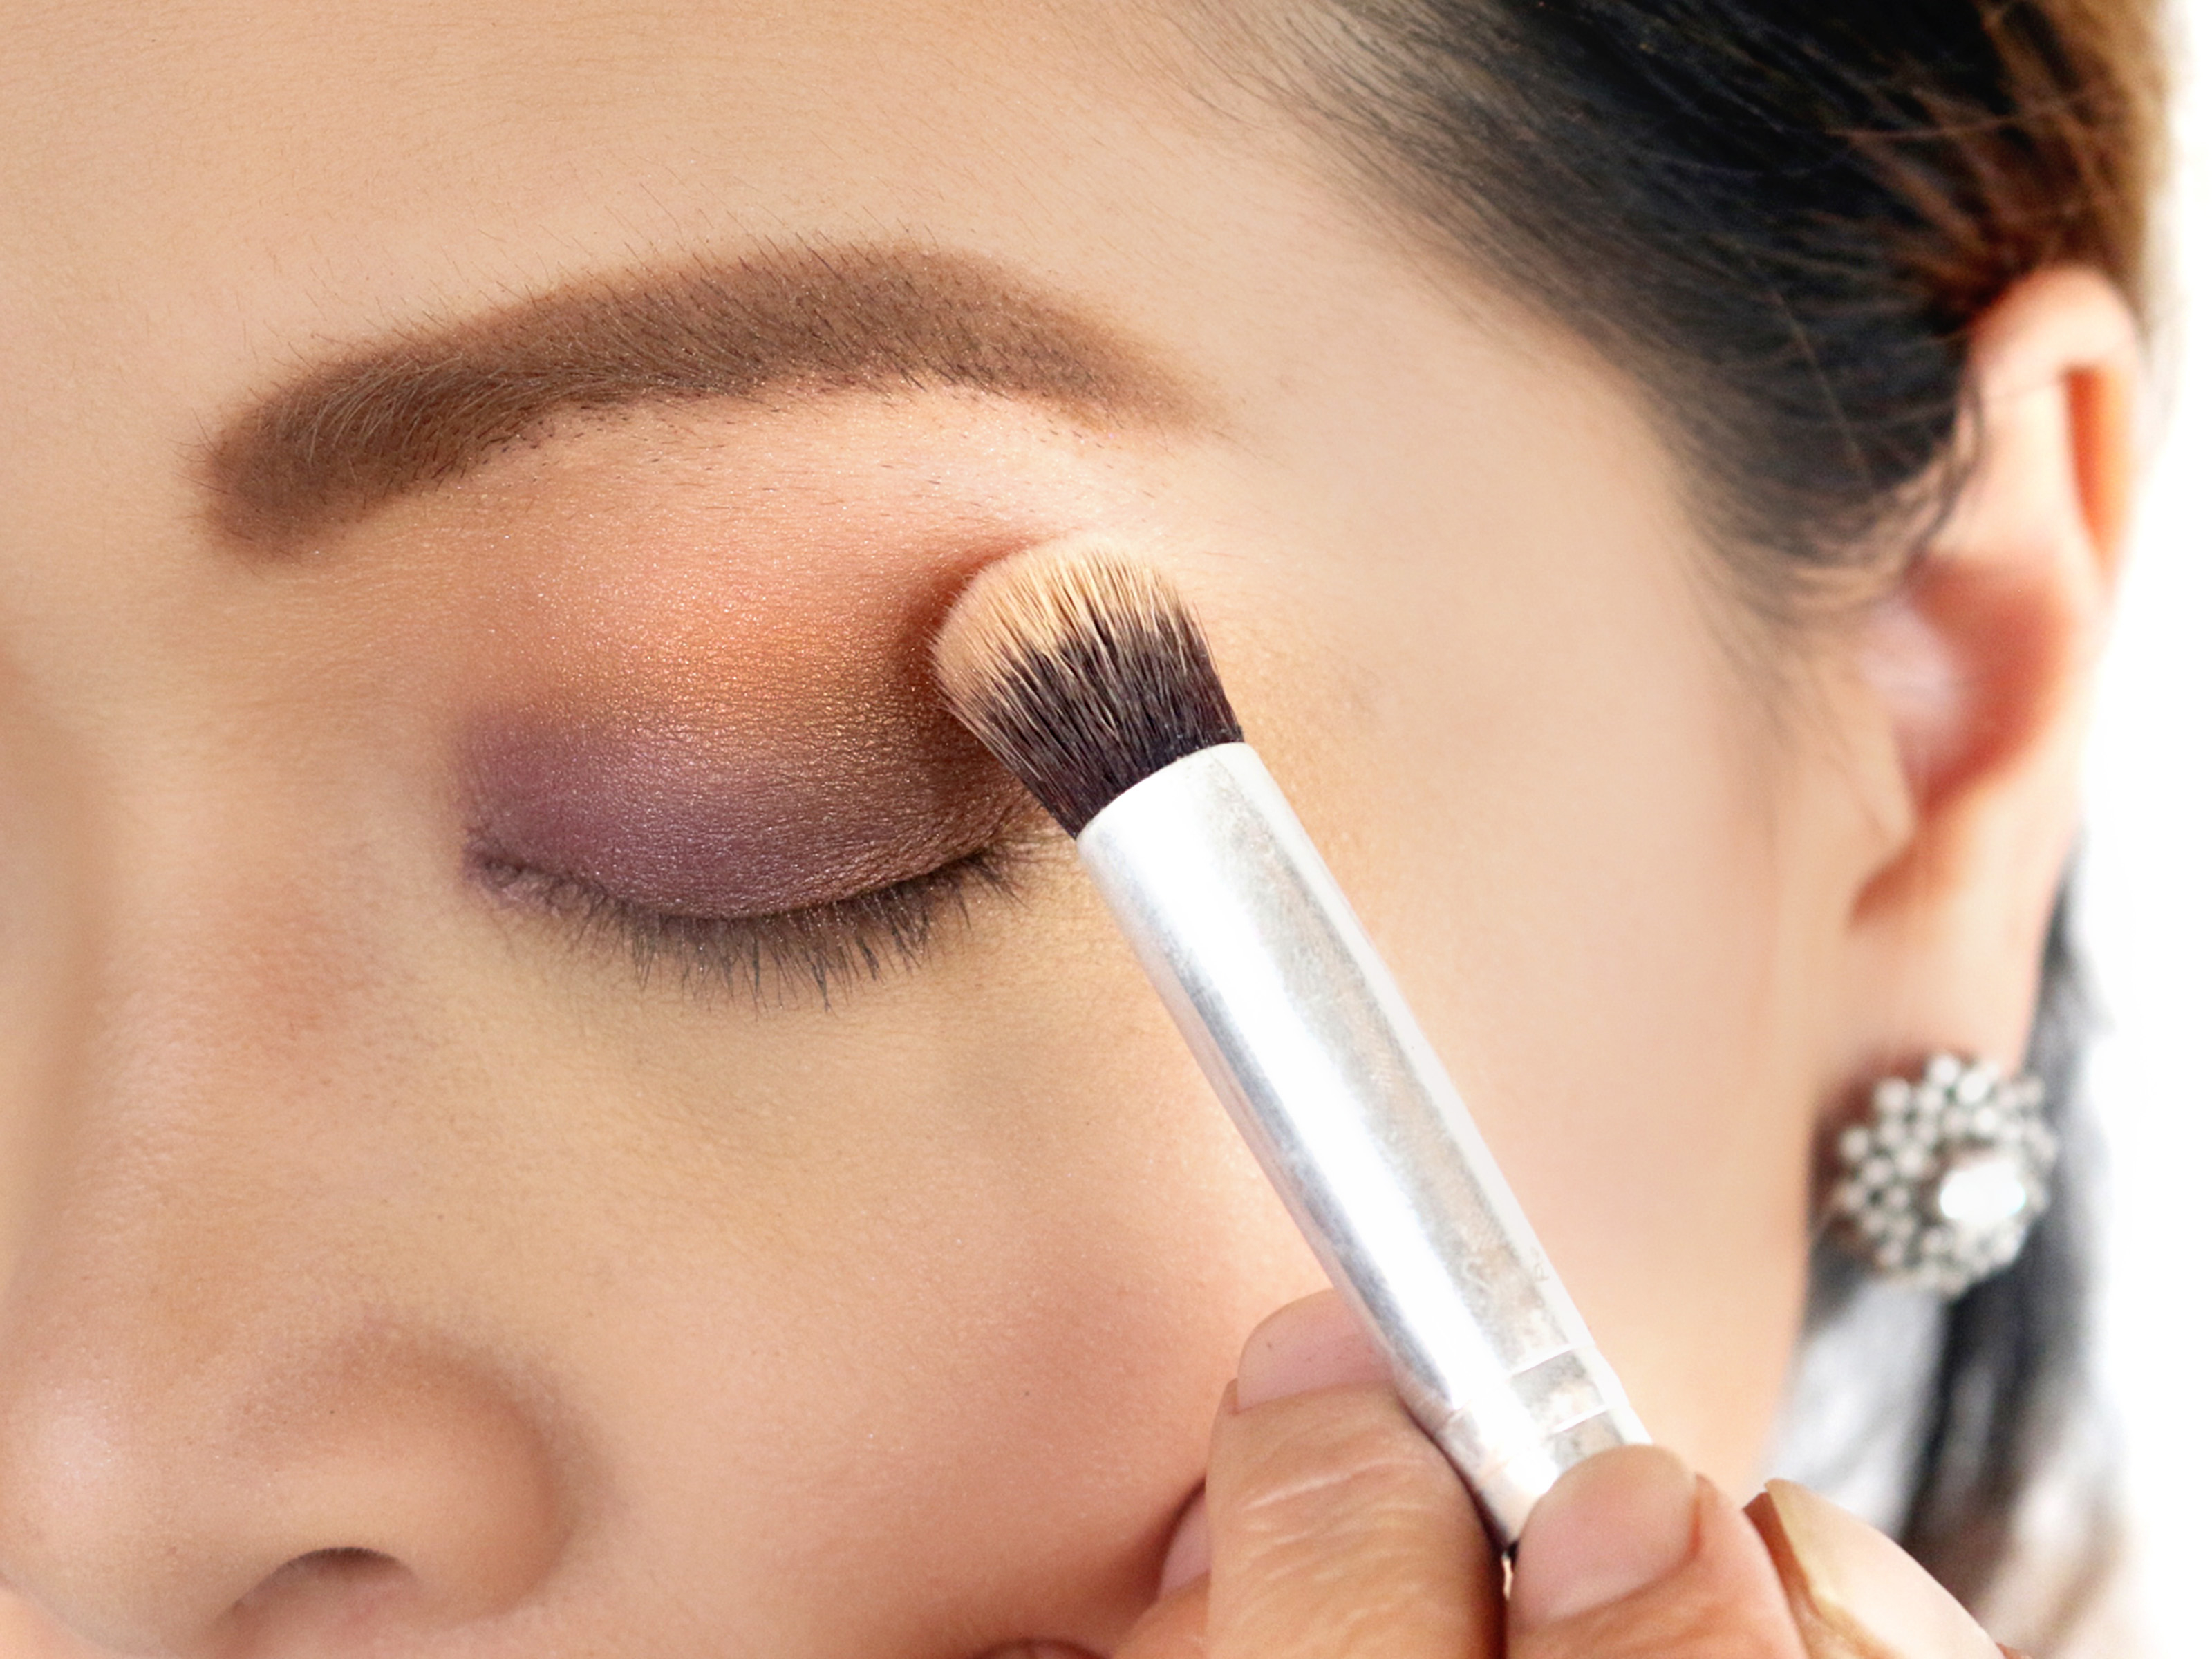 Eye Makeup For Brown Eyes Steps How To Find The Best Eyeshadow For Your Eyes 11 Steps